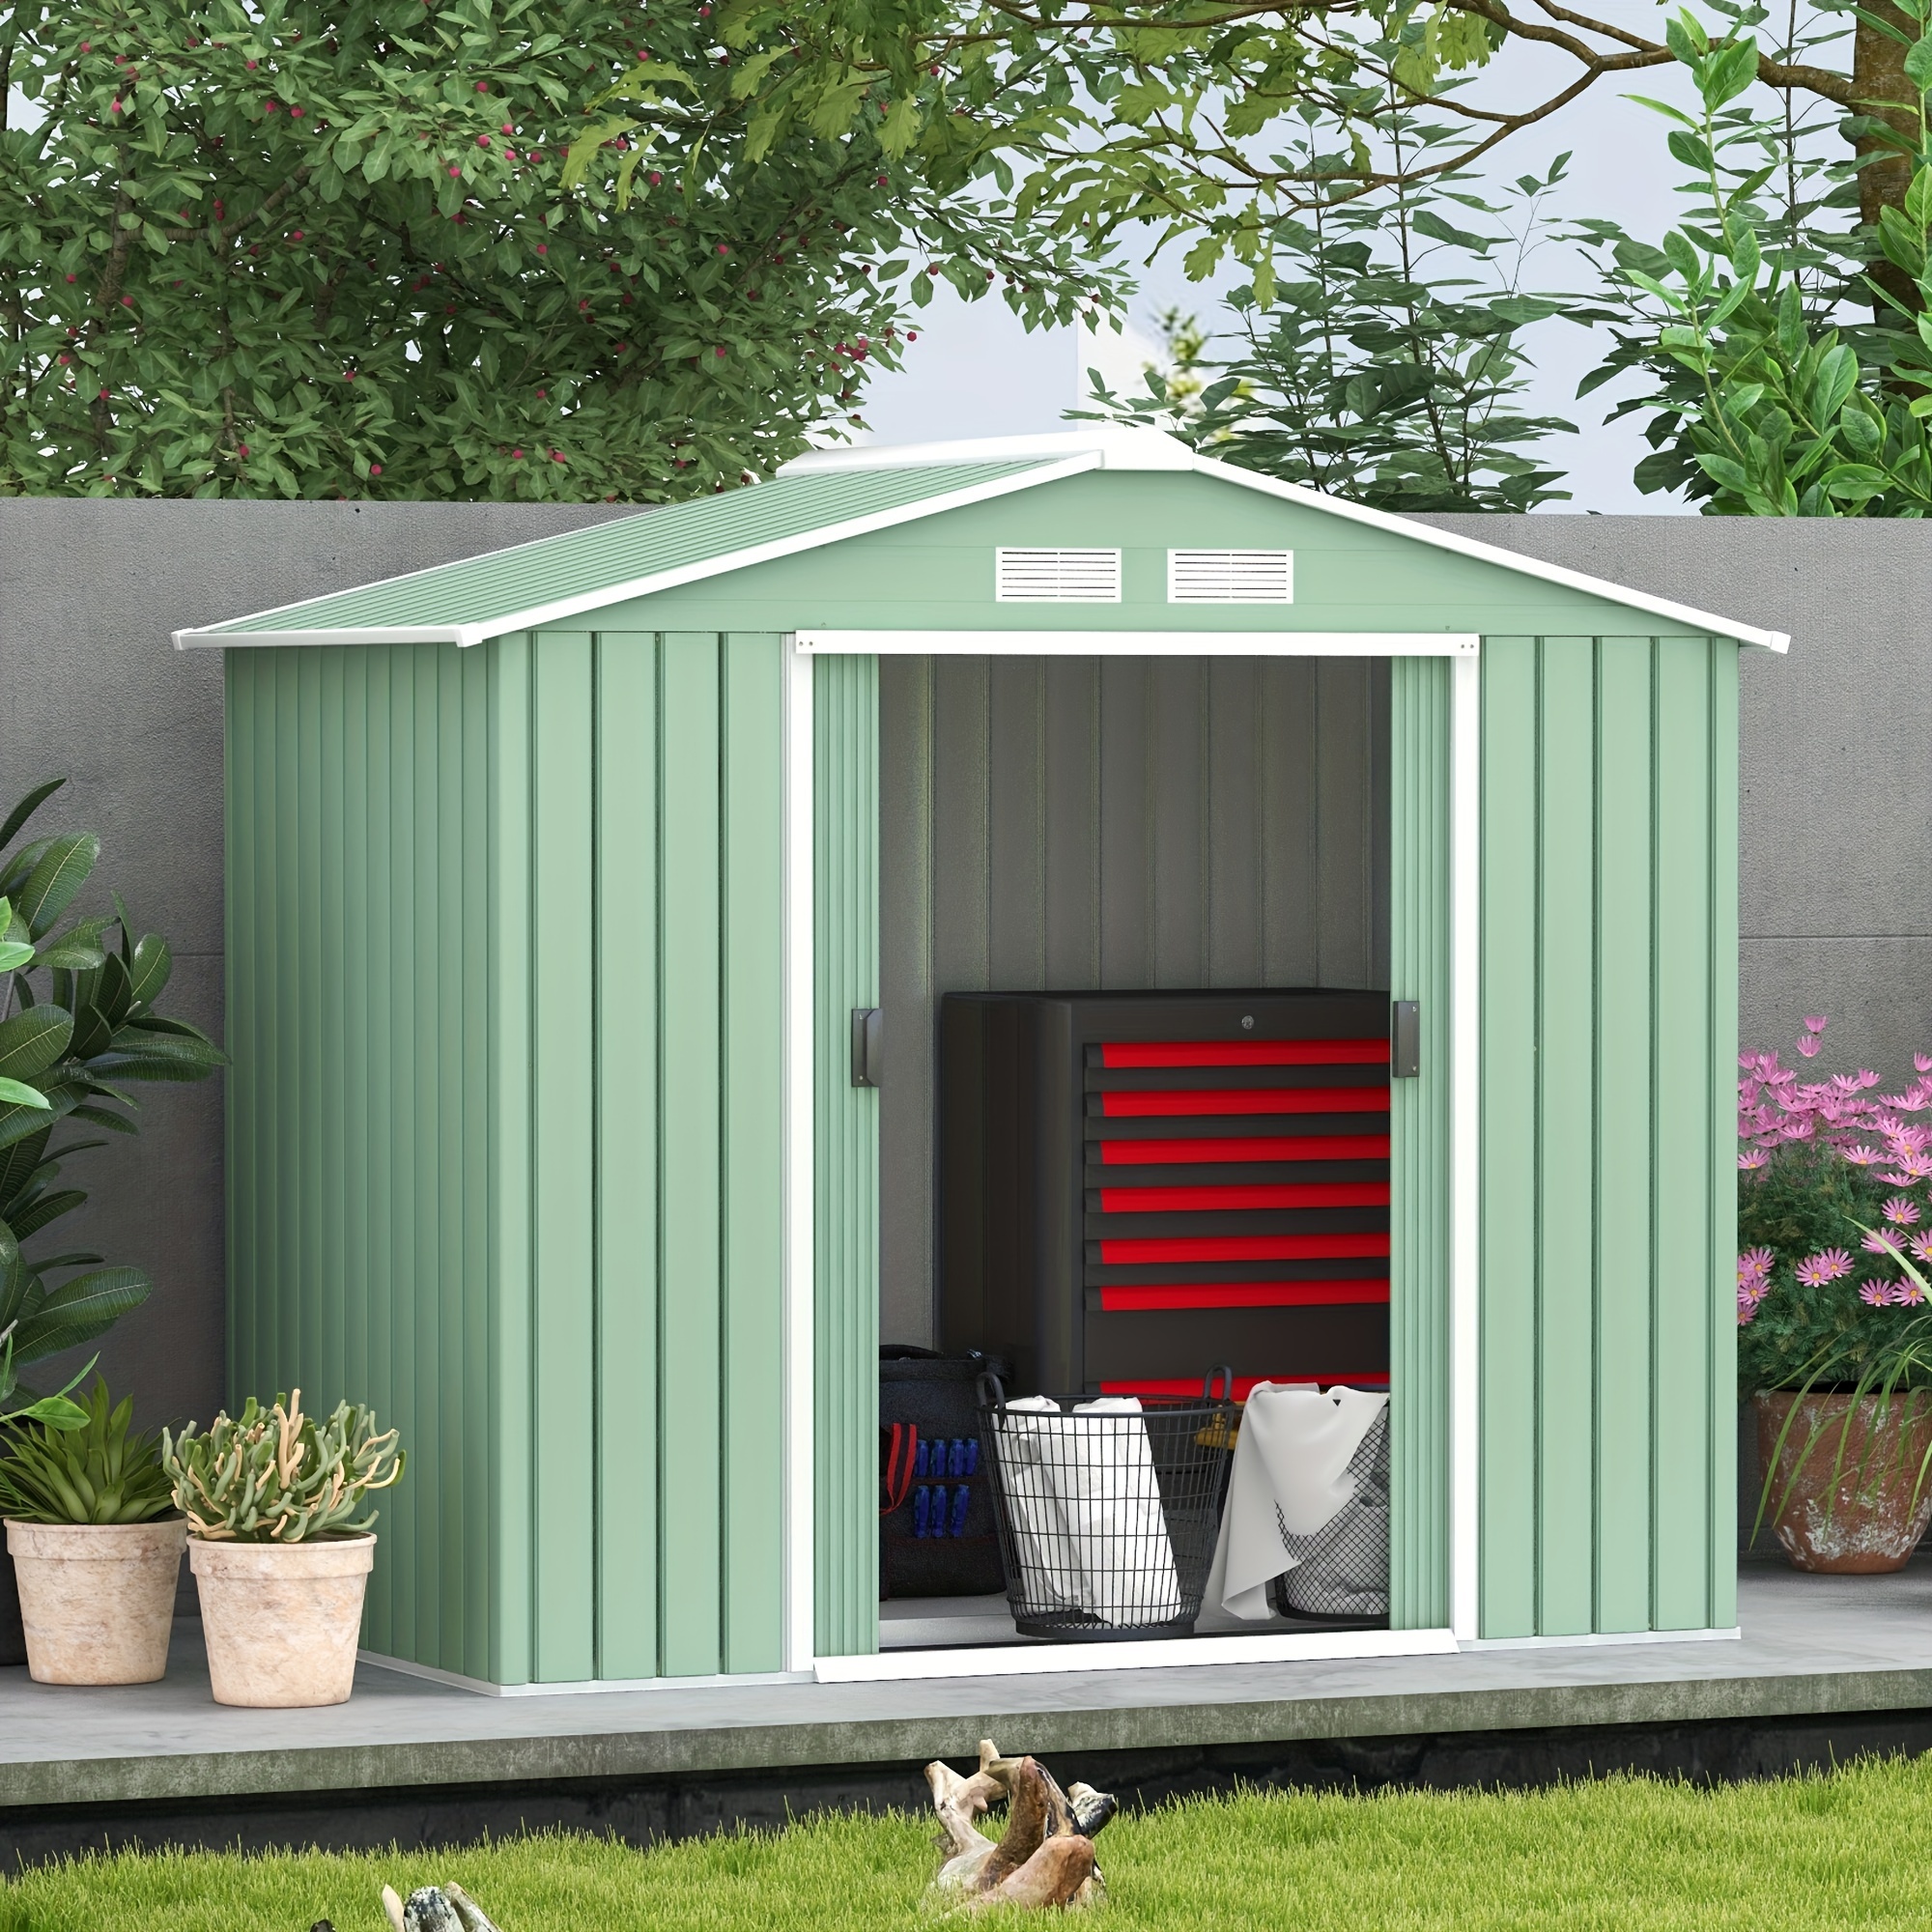 

Outsunny 7' X 4' Outdoor Storage Shed, Garden With Foundation Kit, 4 Vents And Sliding Doors For Backyard, Patio, Garage, Lawn, Light Green